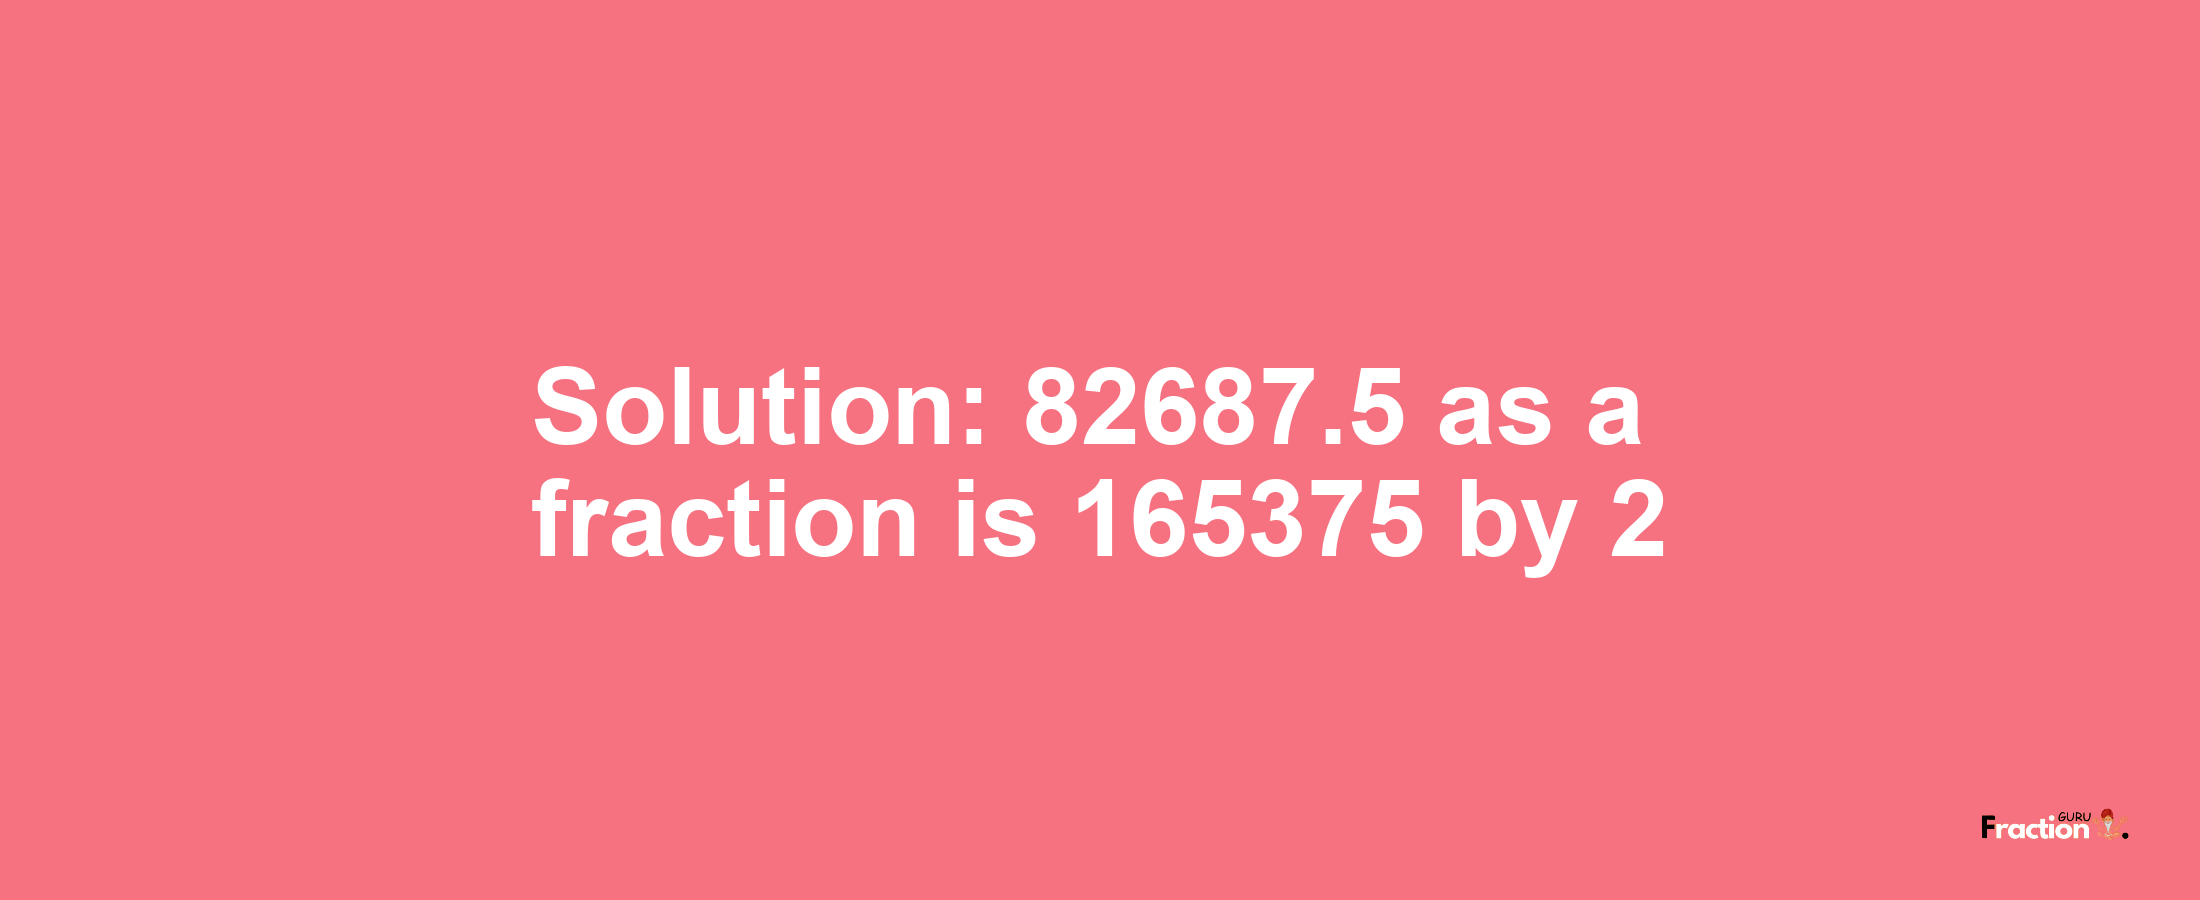 Solution:82687.5 as a fraction is 165375/2